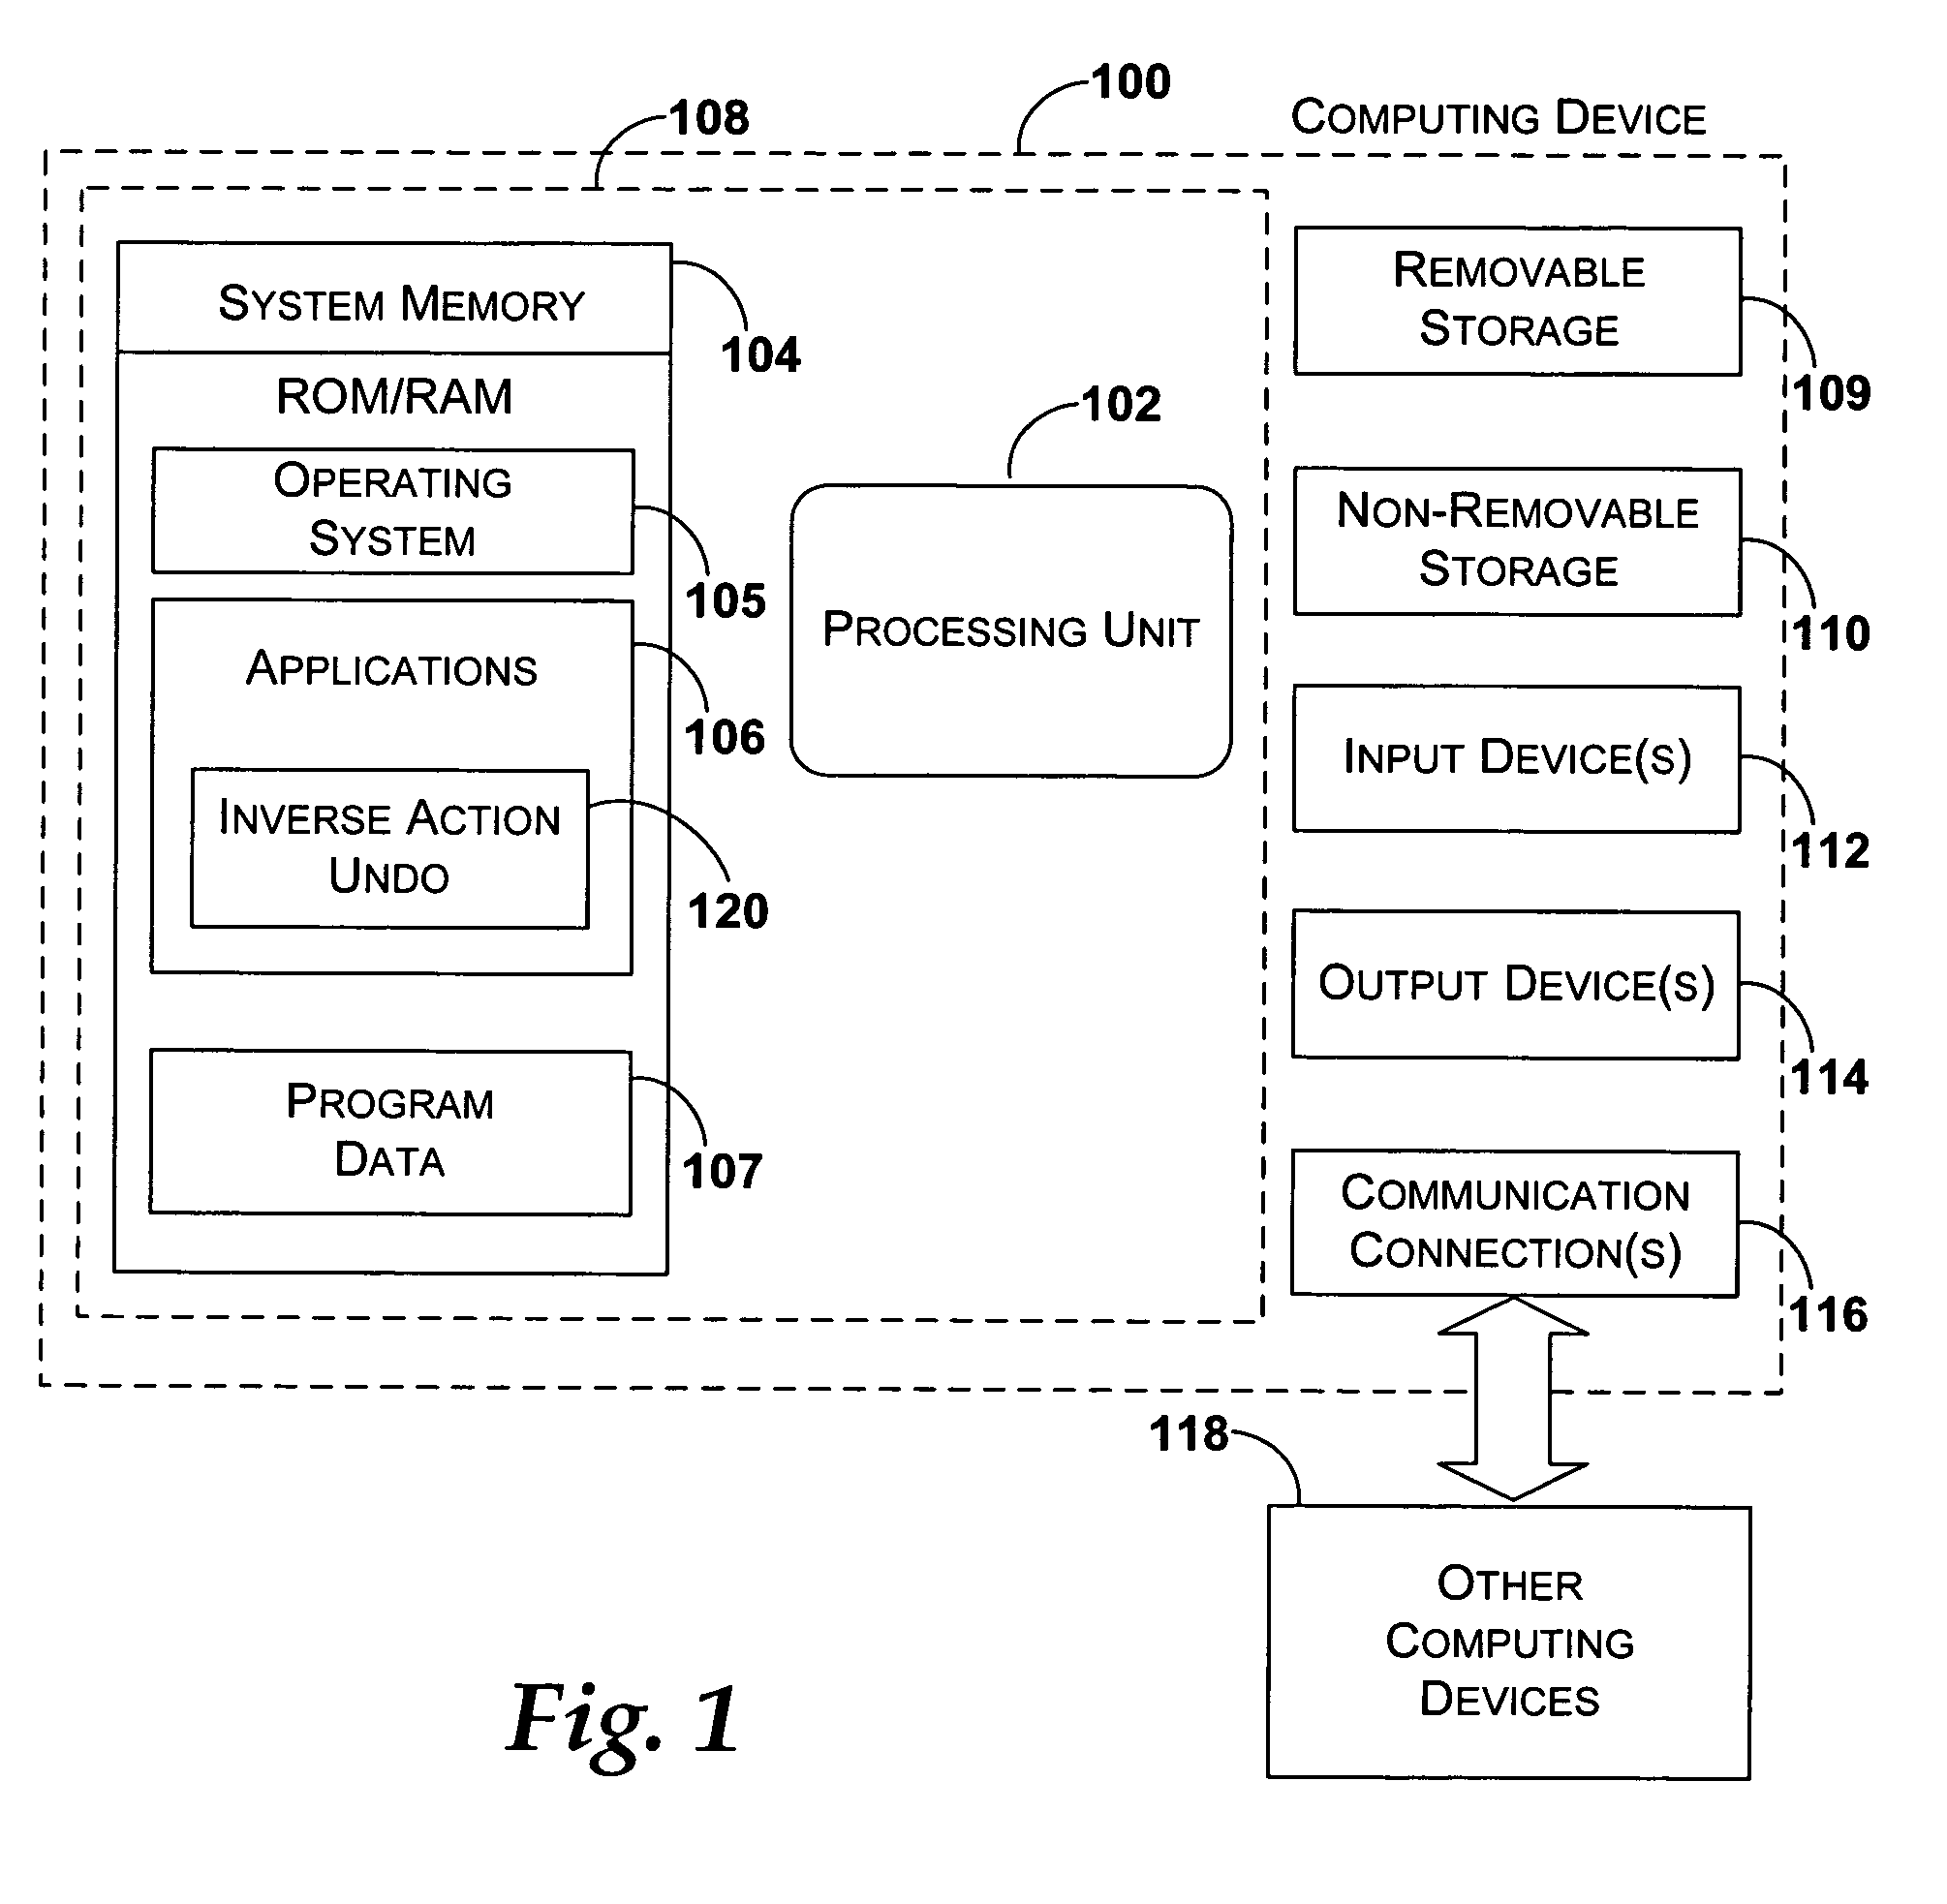 System and method for undoing application actions using inverse actions with atomic rollback